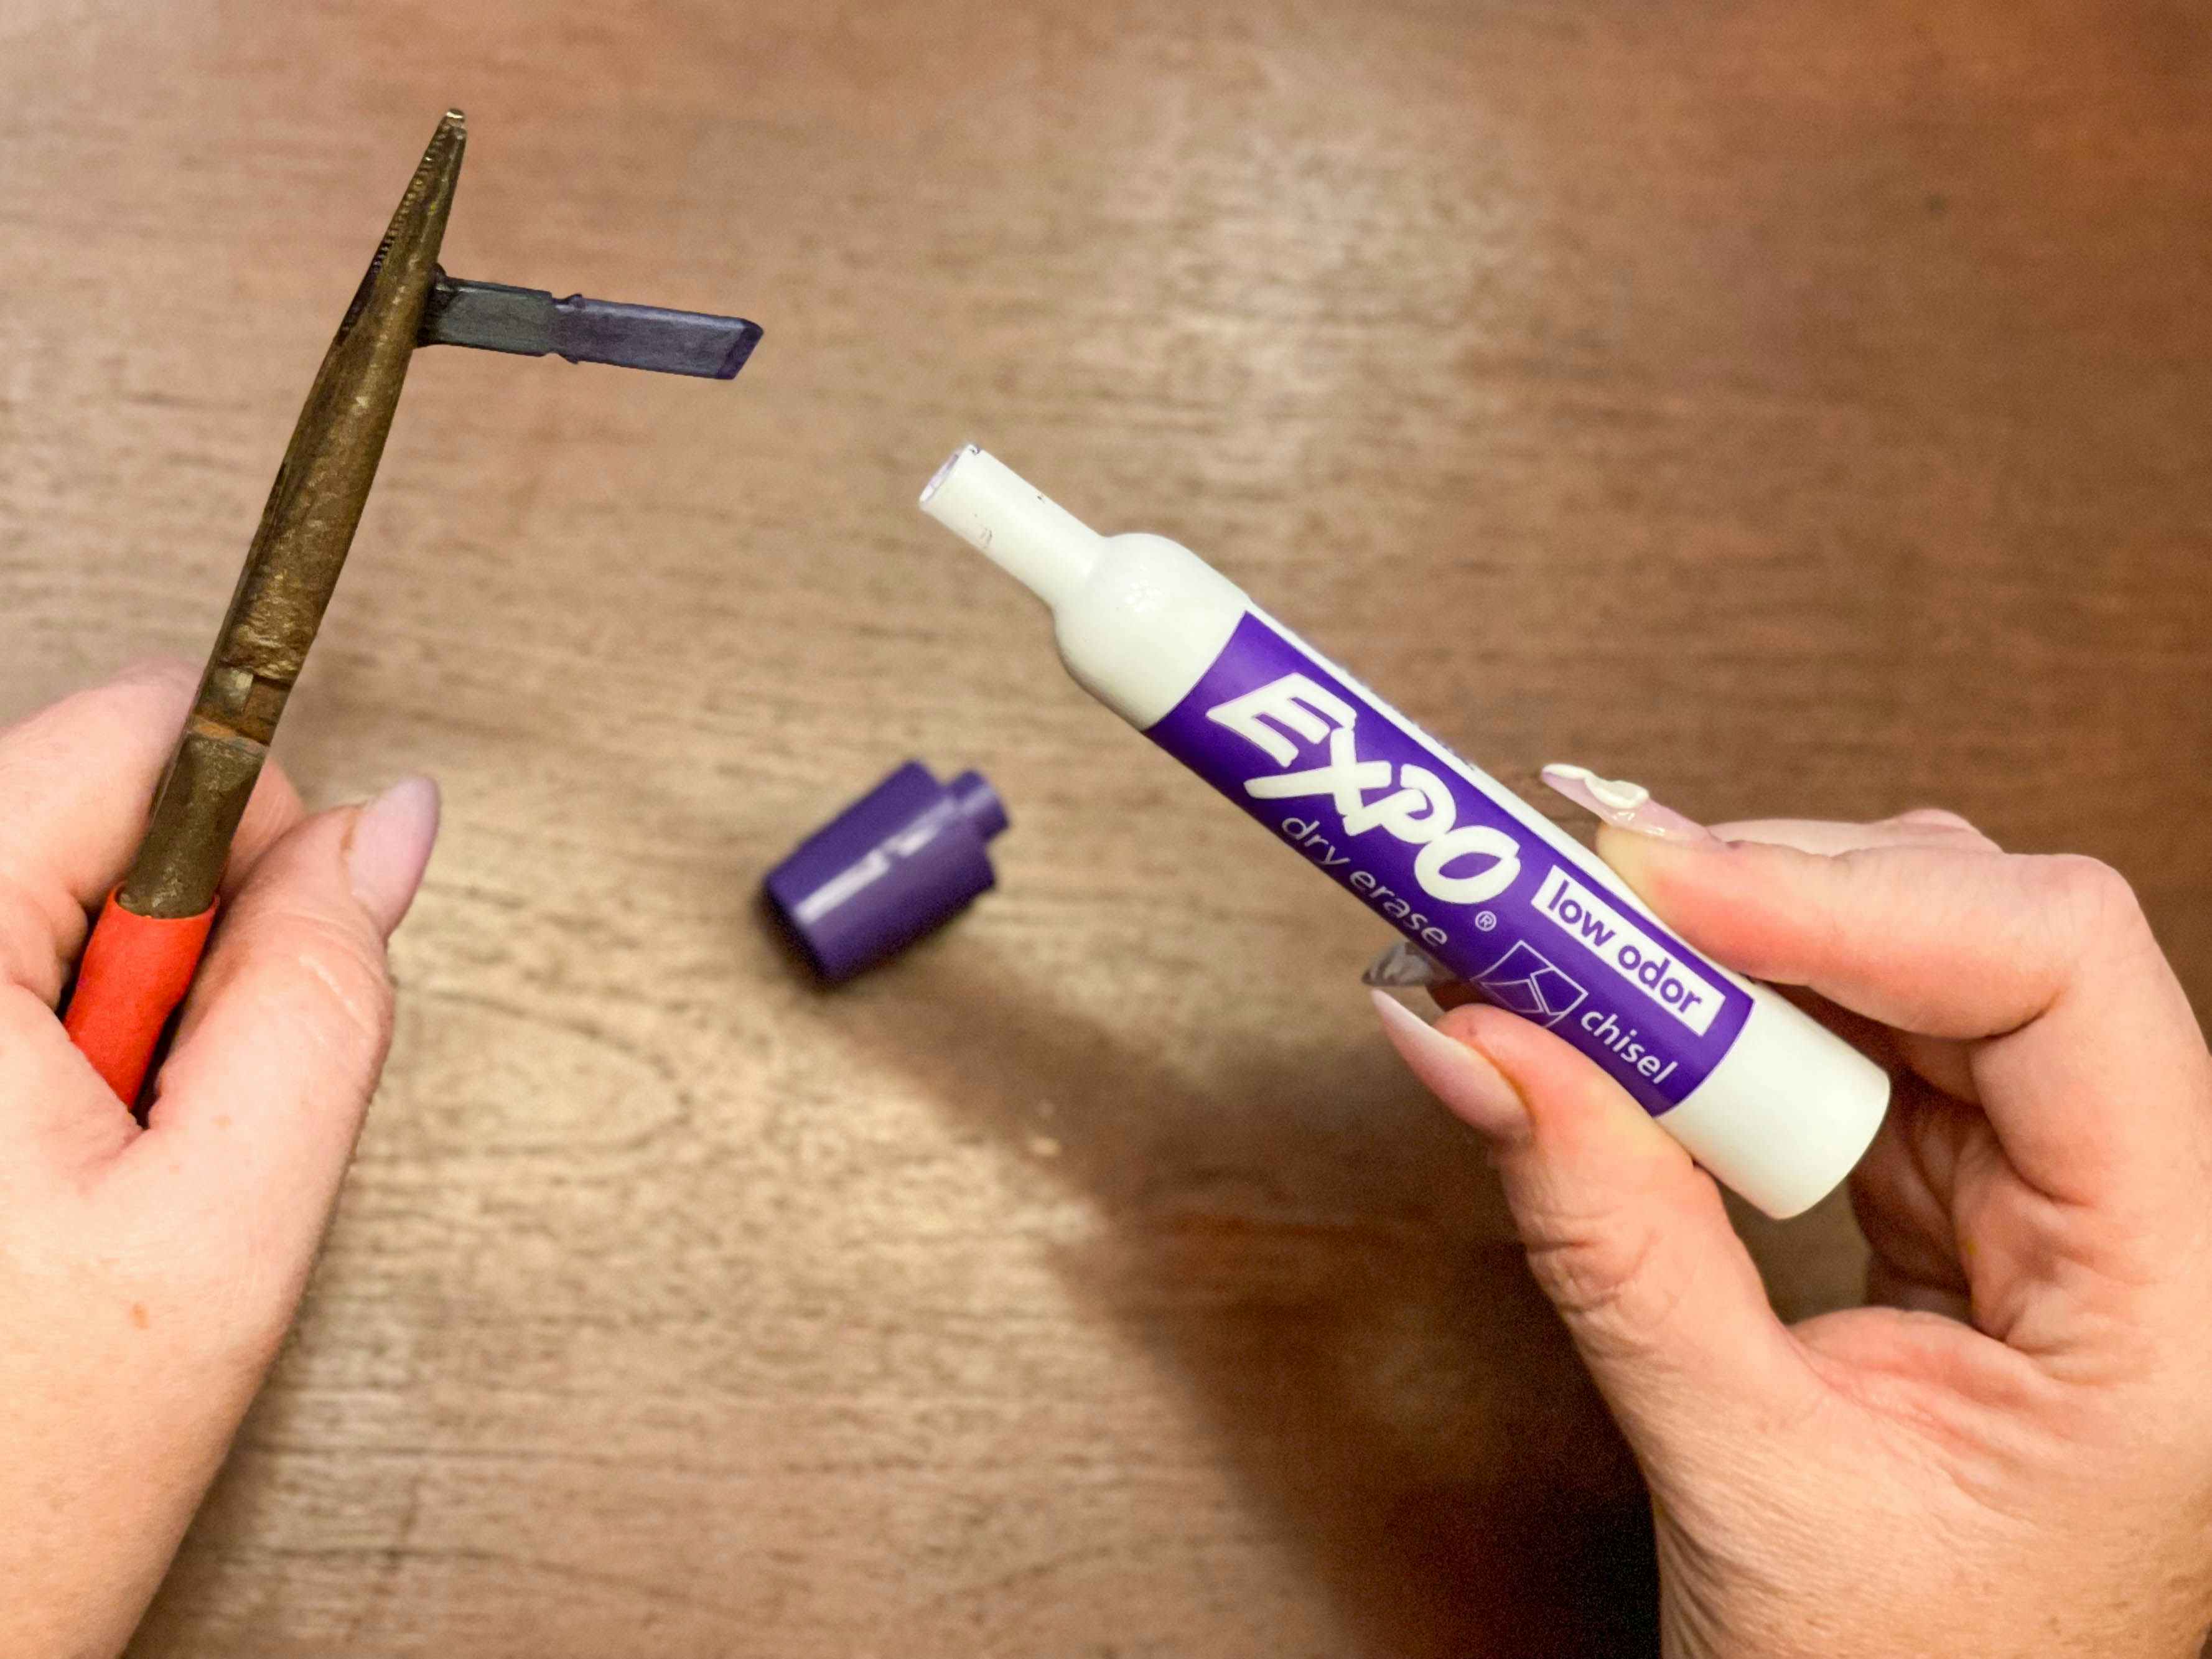 How to Revive Dry Erase Markers and Fix Dried Out Markers - The